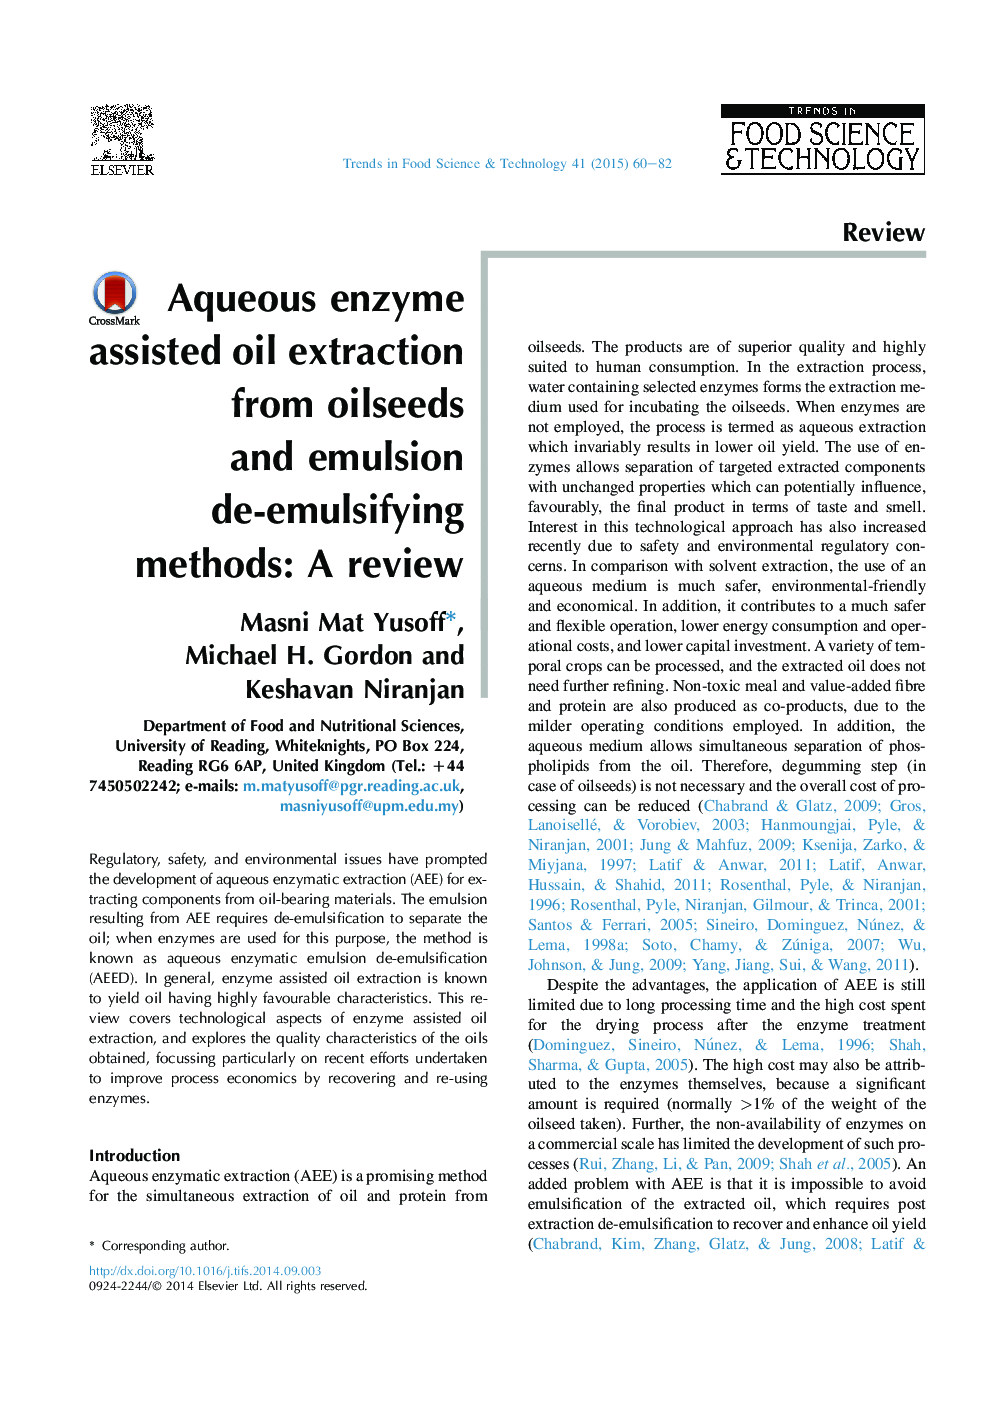 Aqueous enzyme assisted oil extraction from oilseeds and emulsion de-emulsifying methods: A review